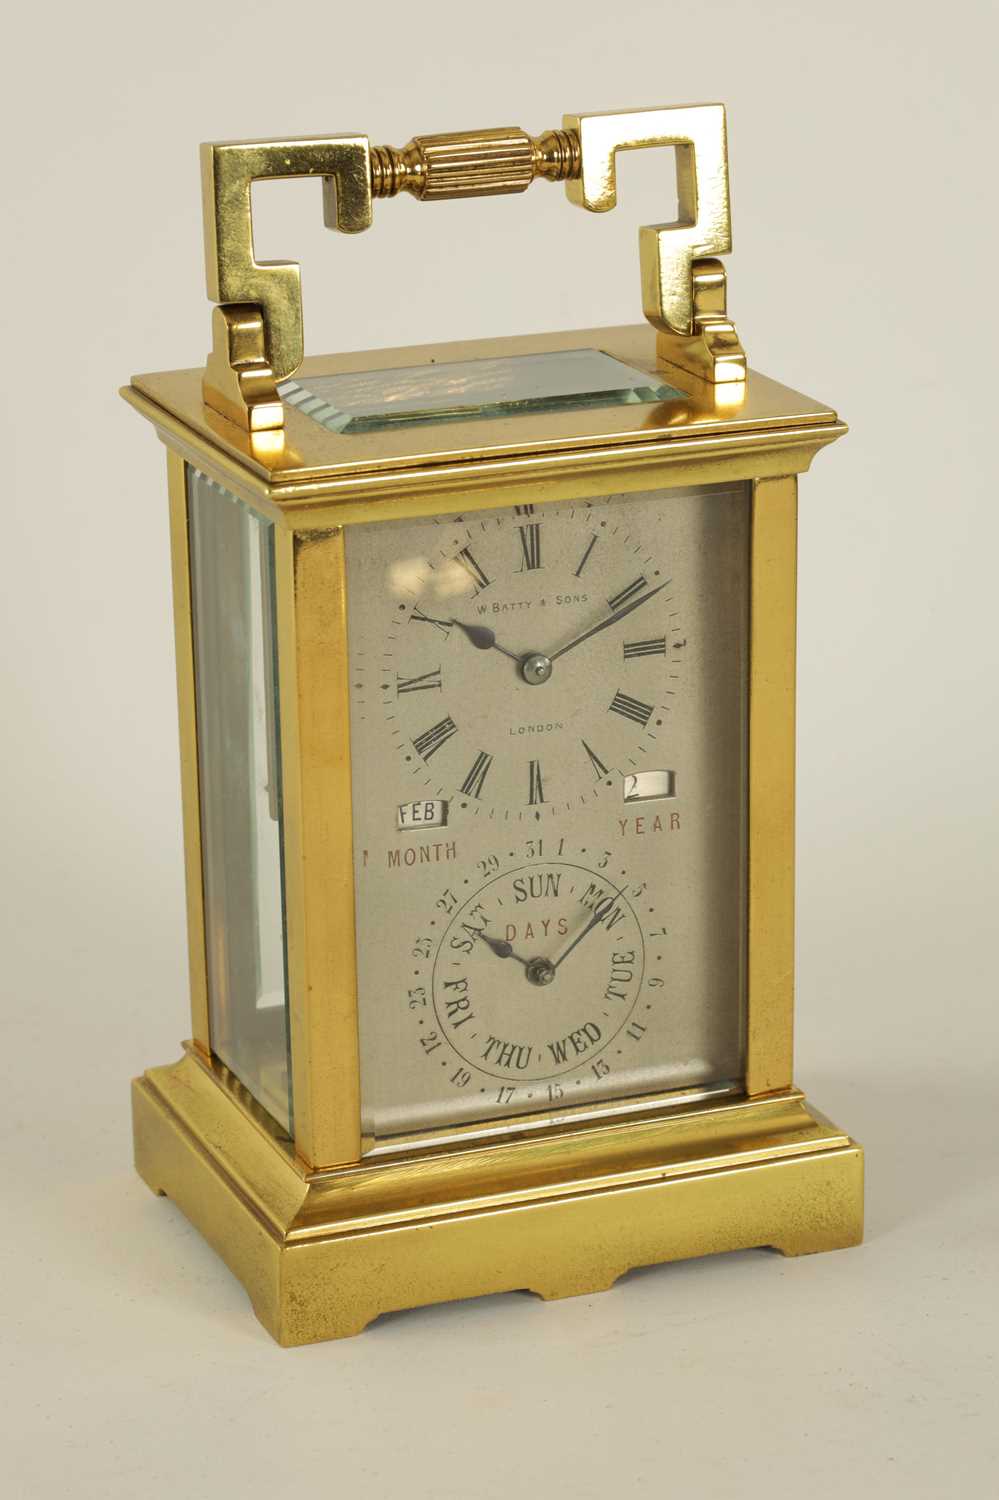 W. BATTY, LONDON. A VERY RARE LATE 19TH CENTURY FRENCH LACQUERED BRASS CARRIAGE CLOCK TIMEPIECE WIT - Image 2 of 9